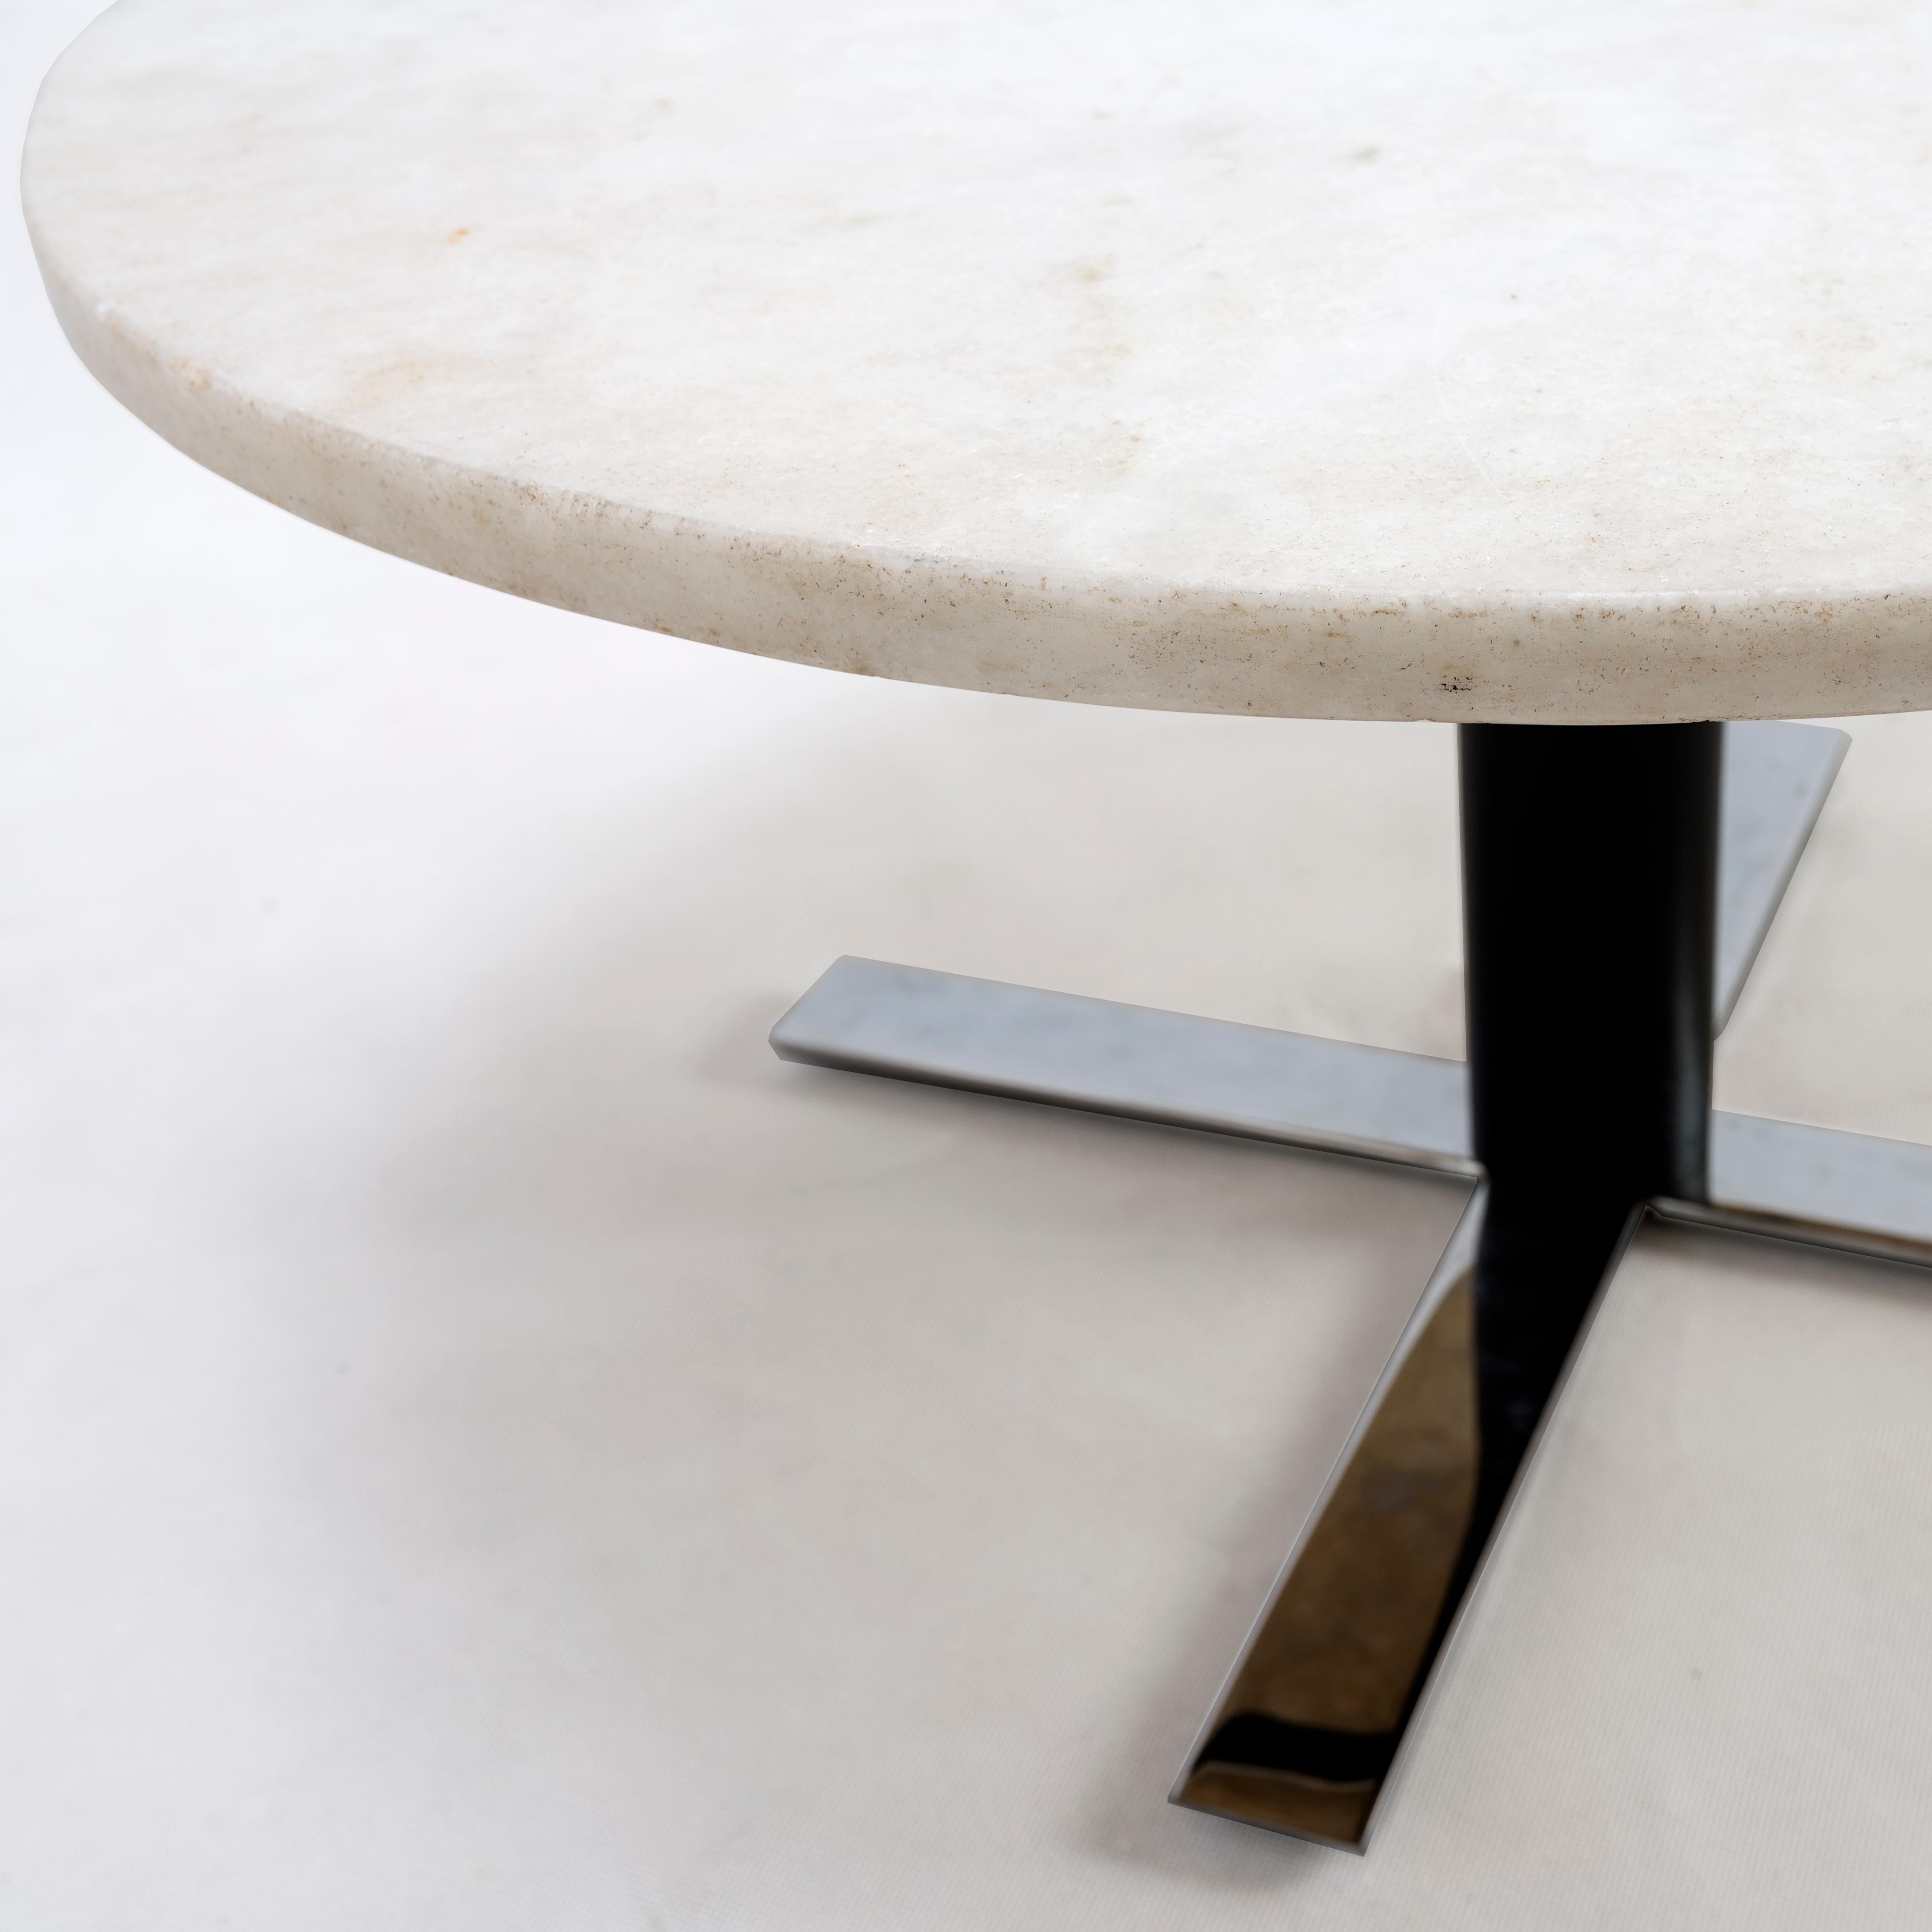 Jorge Zalszupin
Side table
Manufactured by L’Atelier (Visible Tag)
Marble, steel
Brazil, circa 1960.